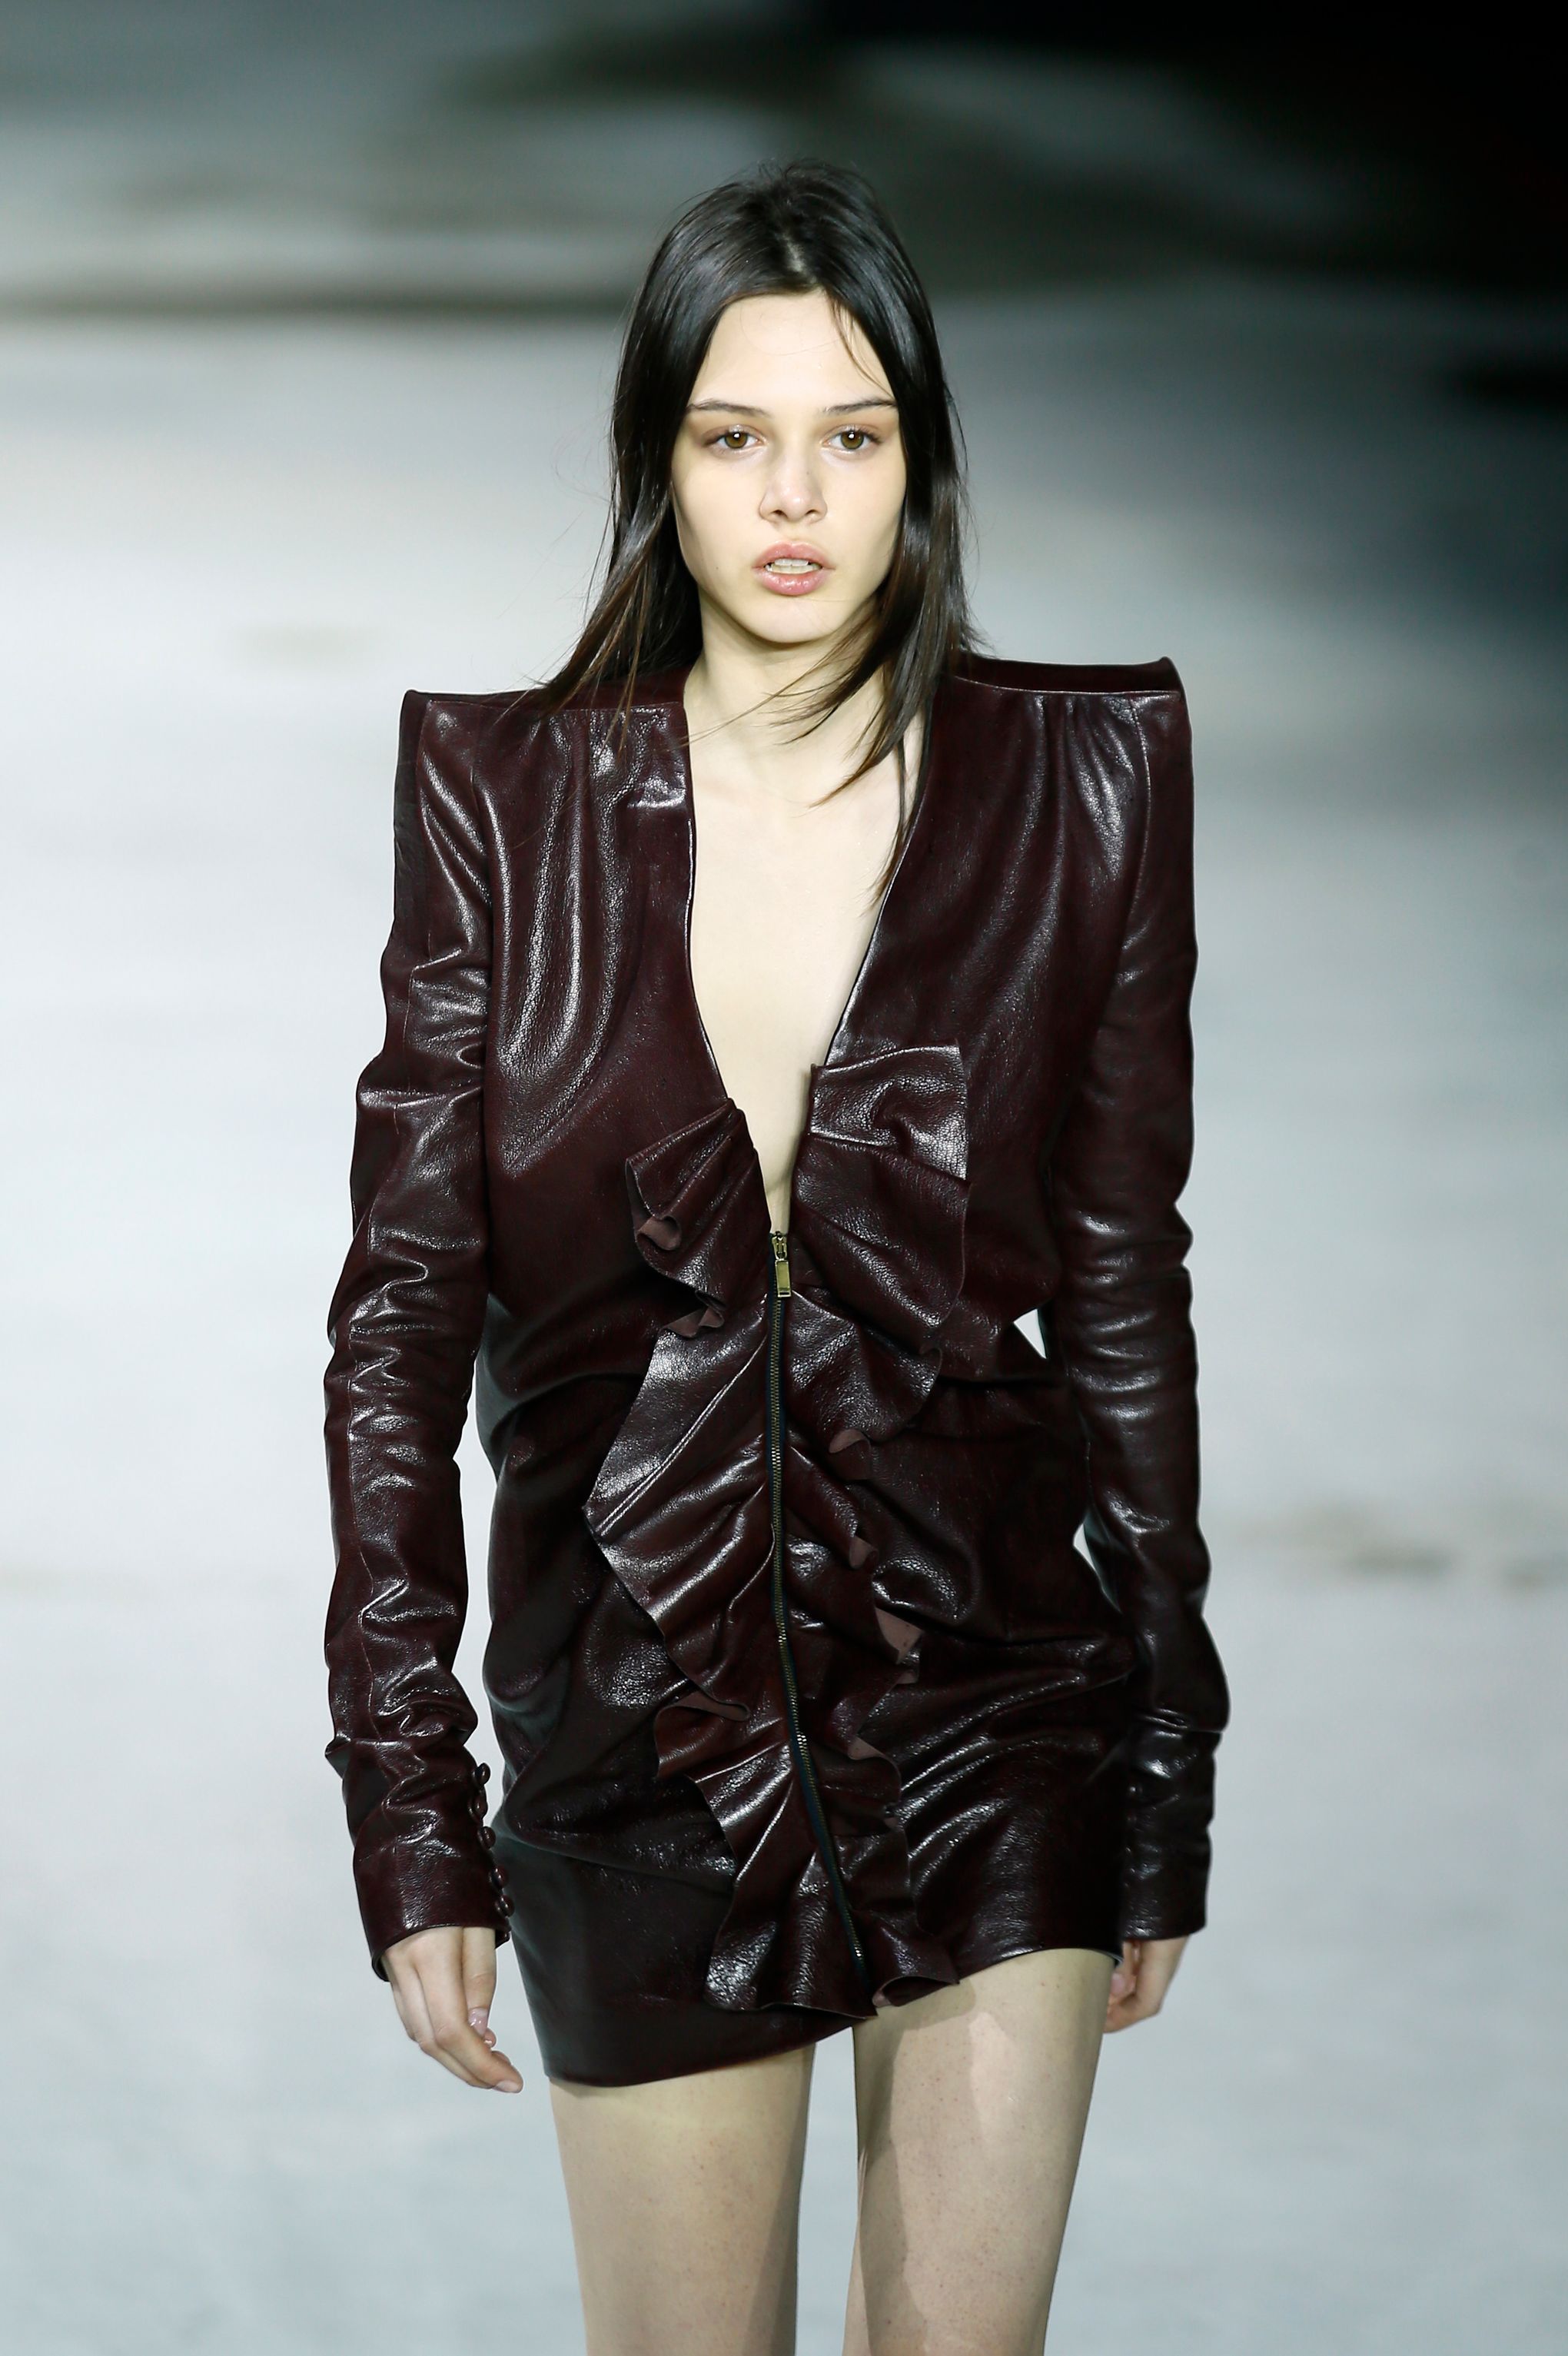 Anthony Vaccarello at his peak for his Saint Laurent fall-winter